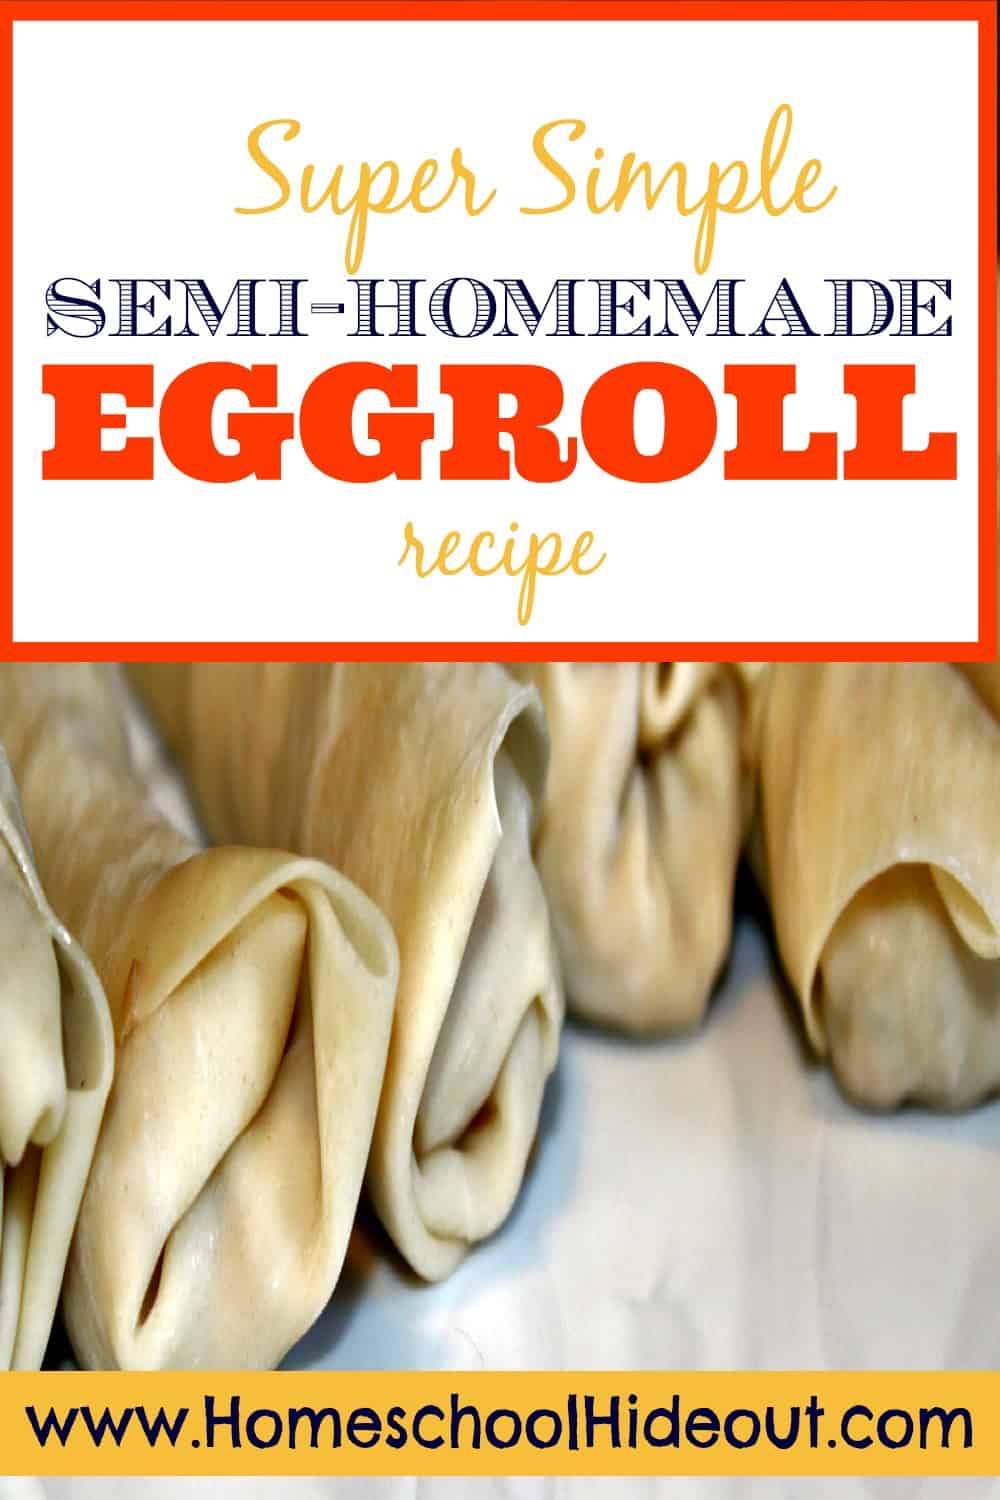 Semi-Homemade eggrolls? This is a recipe that belongs in MY KITCHEN!